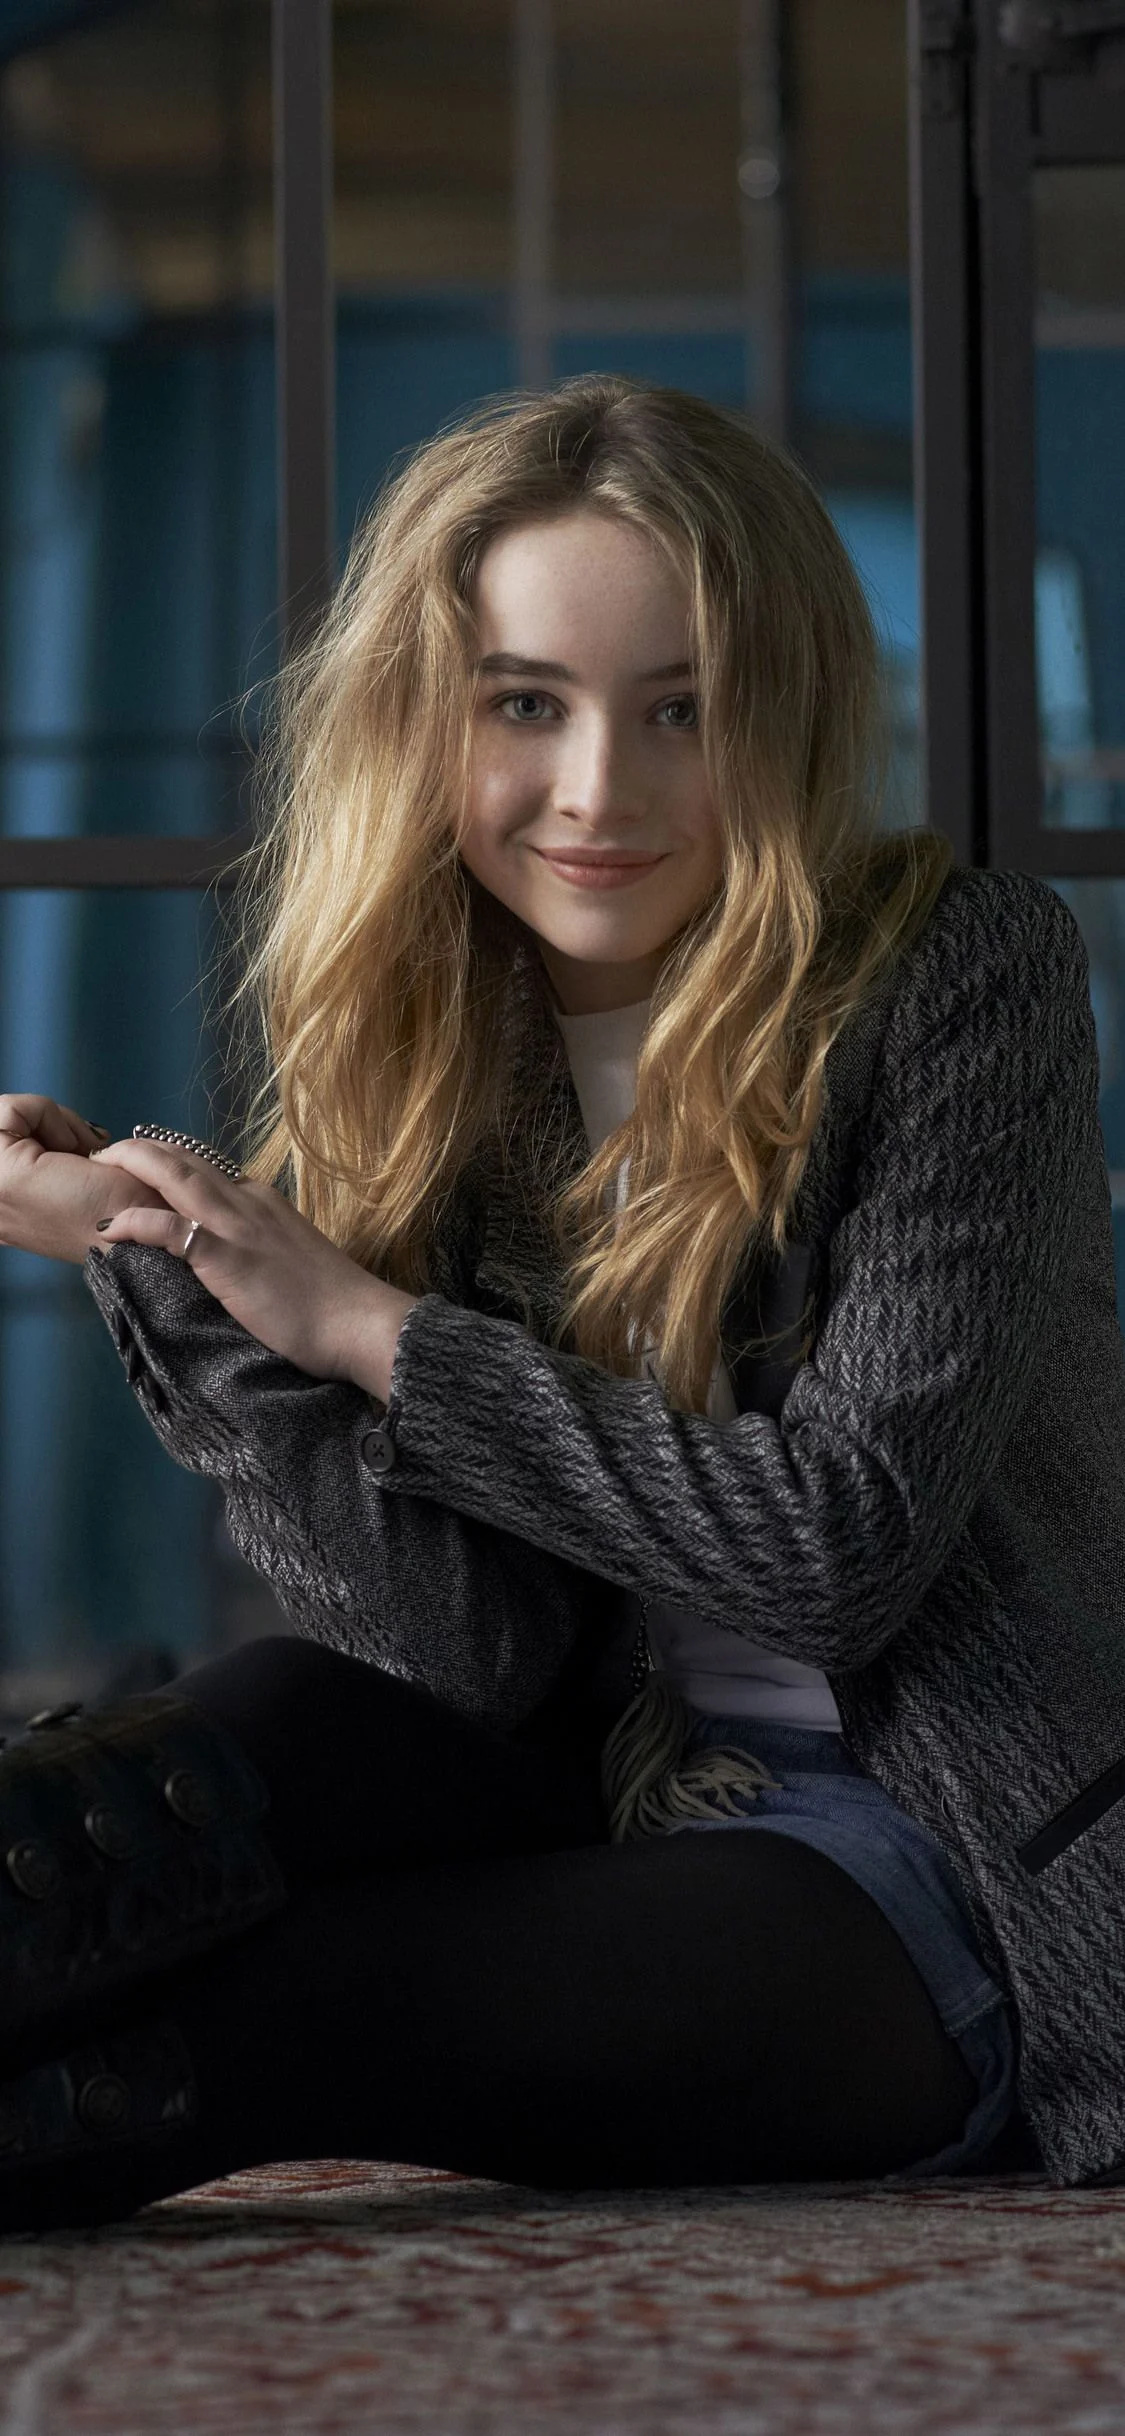 Sabrina Carpenter Movies, iPhone backgrounds, Latest images, Celebrity wallpapers, 1130x2440 HD Handy